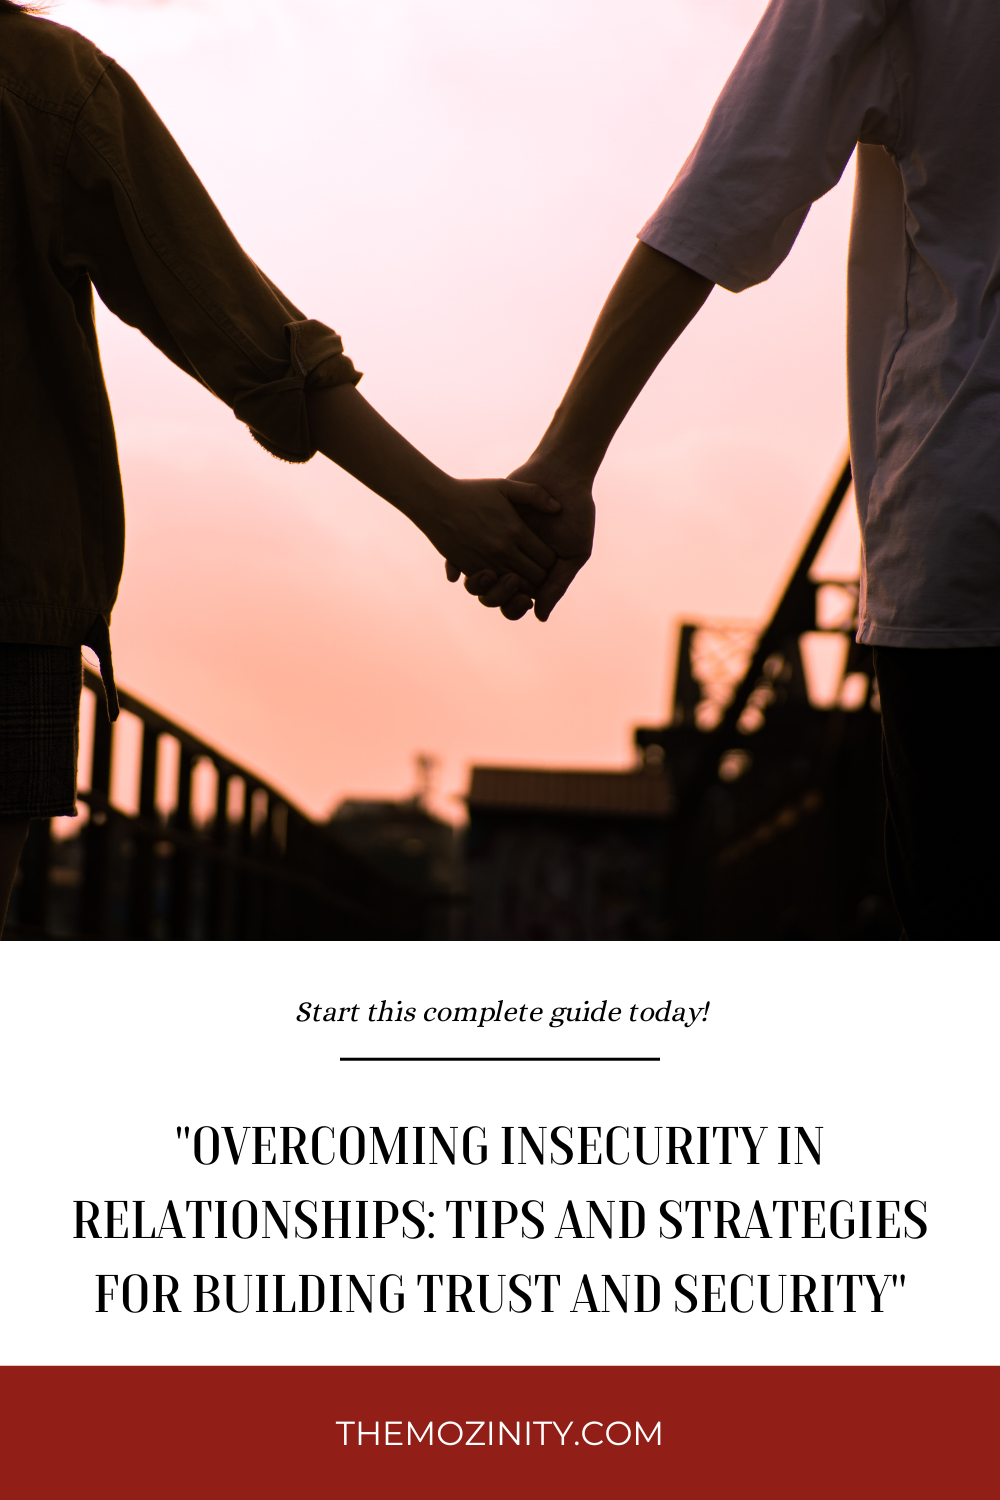 "Overcoming Insecurity in Relationships: Tips and Strategies for Building Trust and Security"